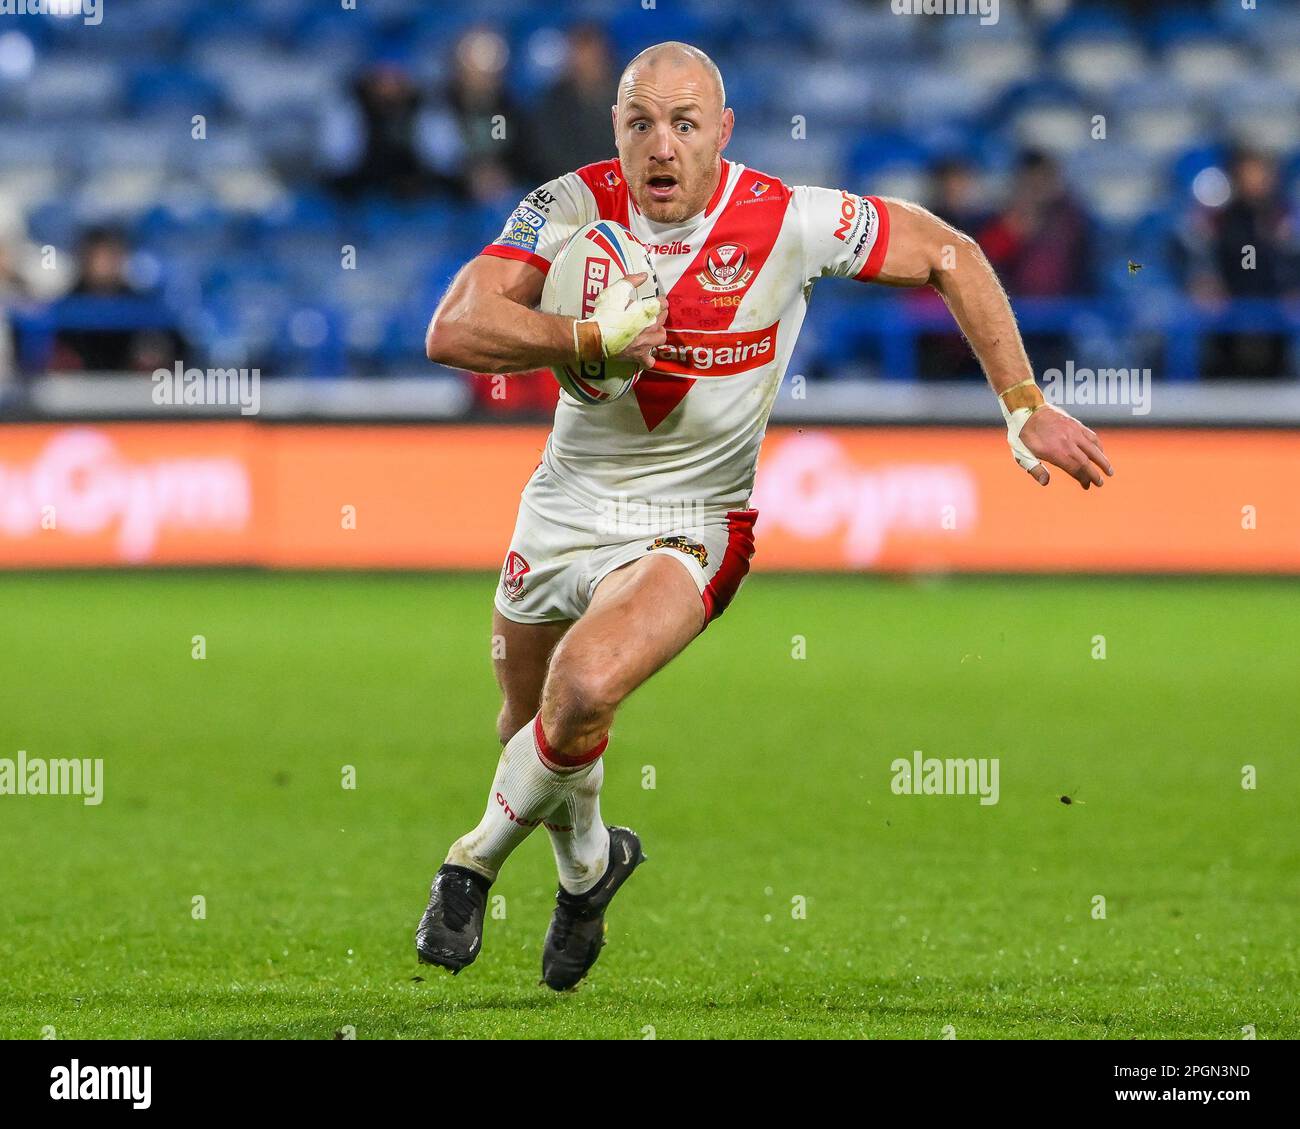 James Roby #9 of St Helens makes a break during the Betfred Super League Round 6 match Huddersfield Giants vs St Helens at John Smith's Stadium, Huddersfield, United Kingdom, 23rd March 2023  (Photo by Craig Thomas/News Images) Stock Photo